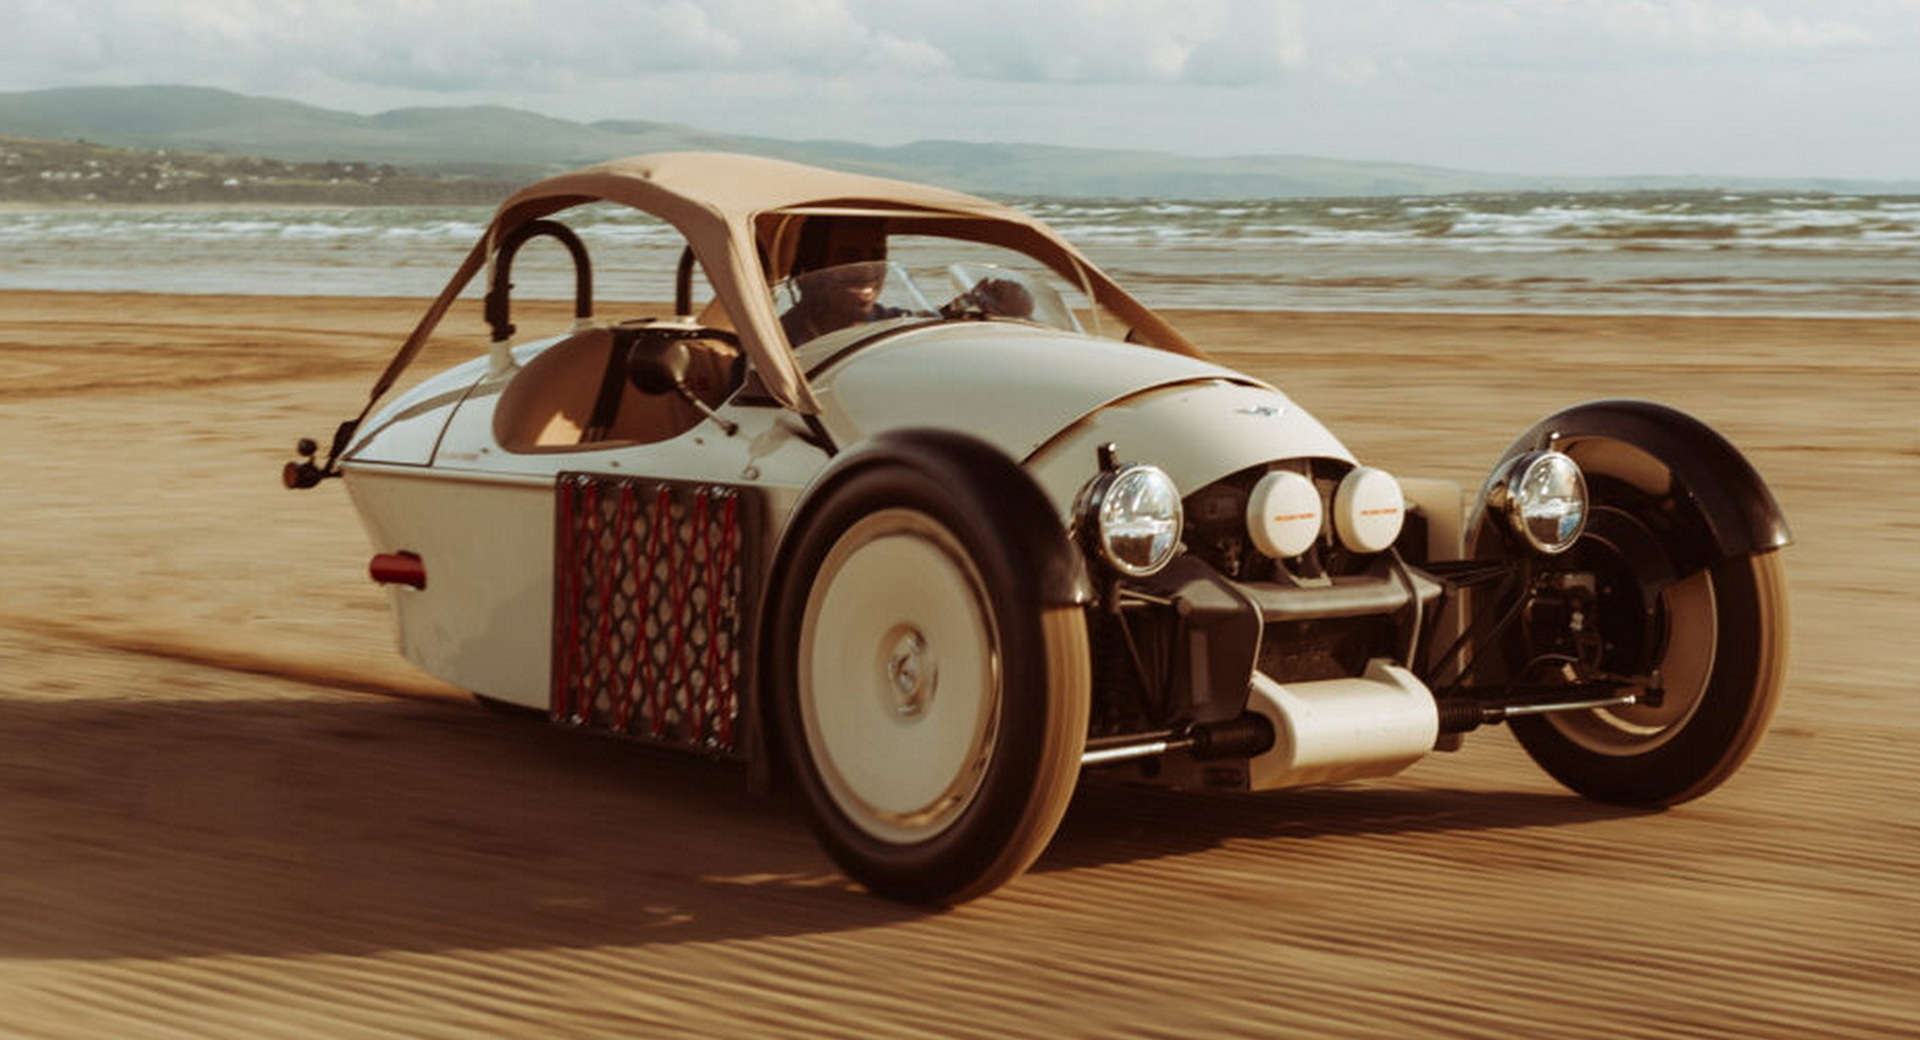 Morgan Creates One-Off Super 3 With Almost A Top Carscoops